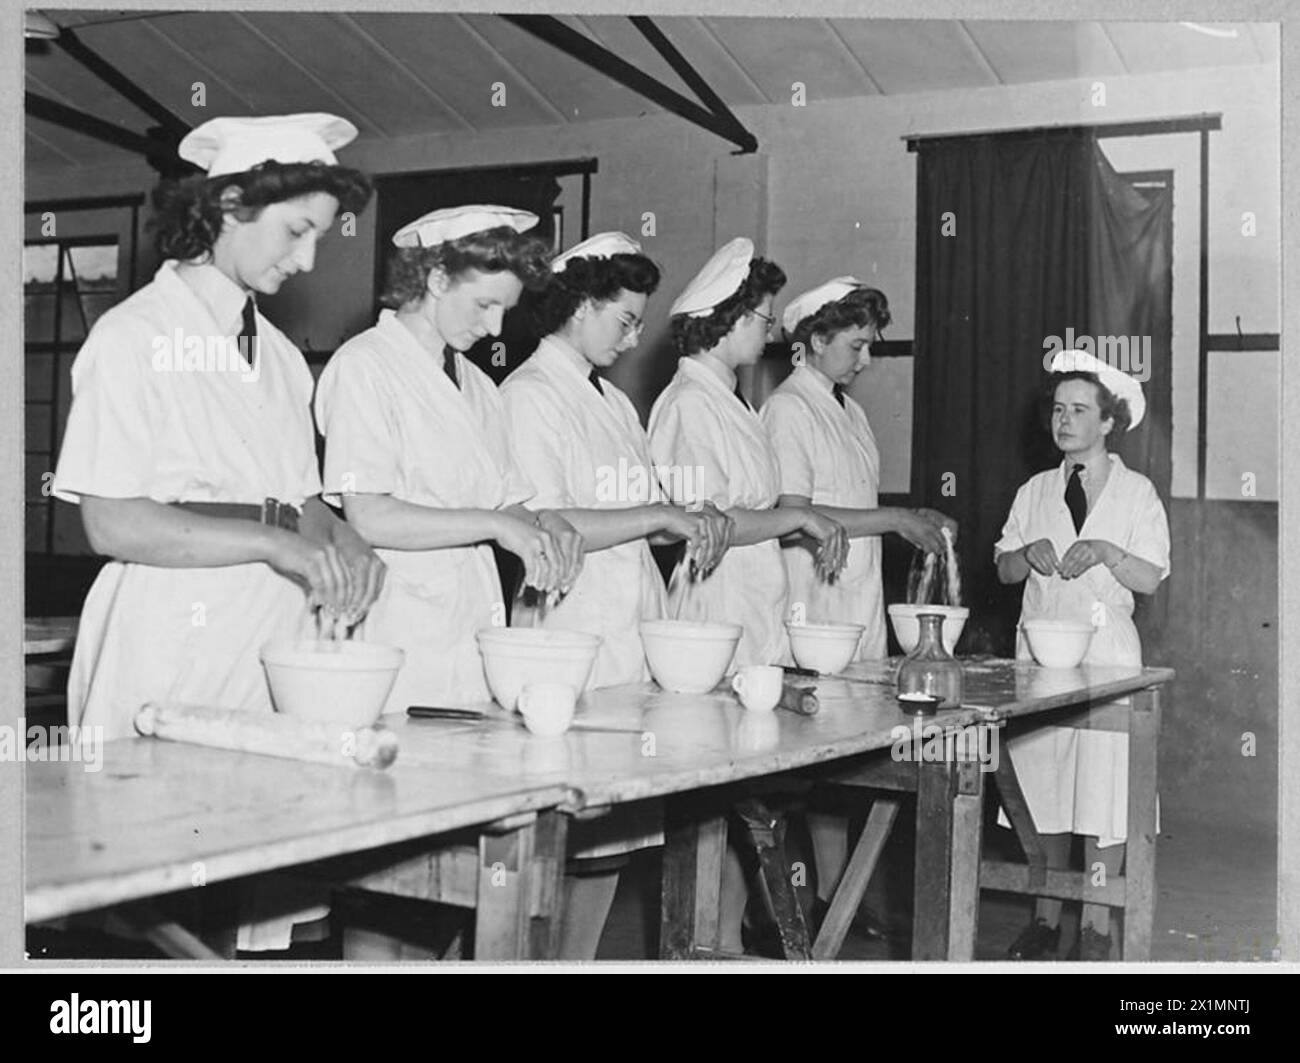 'CIVVY STREET COURSE' IN R.A.F. PATHFINDER GROUP - 16004 Picture issued 1945 shows - W.A.A.Fs learn to become good cooks during E.V.T. instruction. All R.A.F. and W.A.A.F. personnel are allowed 6 hours weekly of their working time for E.V.T. and any voluntary time they care to add. There is no rank distinction among pupils, all officers and airmen are referred to as 'Mr.'. W.A.A.F. officers and airwomen as 'Miss'. Little instructress [at end of line] with big job is Section Officer Berry Young of Jordan Hill, Glasgow. Catering Officer and expert in domestic science. She is showing the pupils, Stock Photo